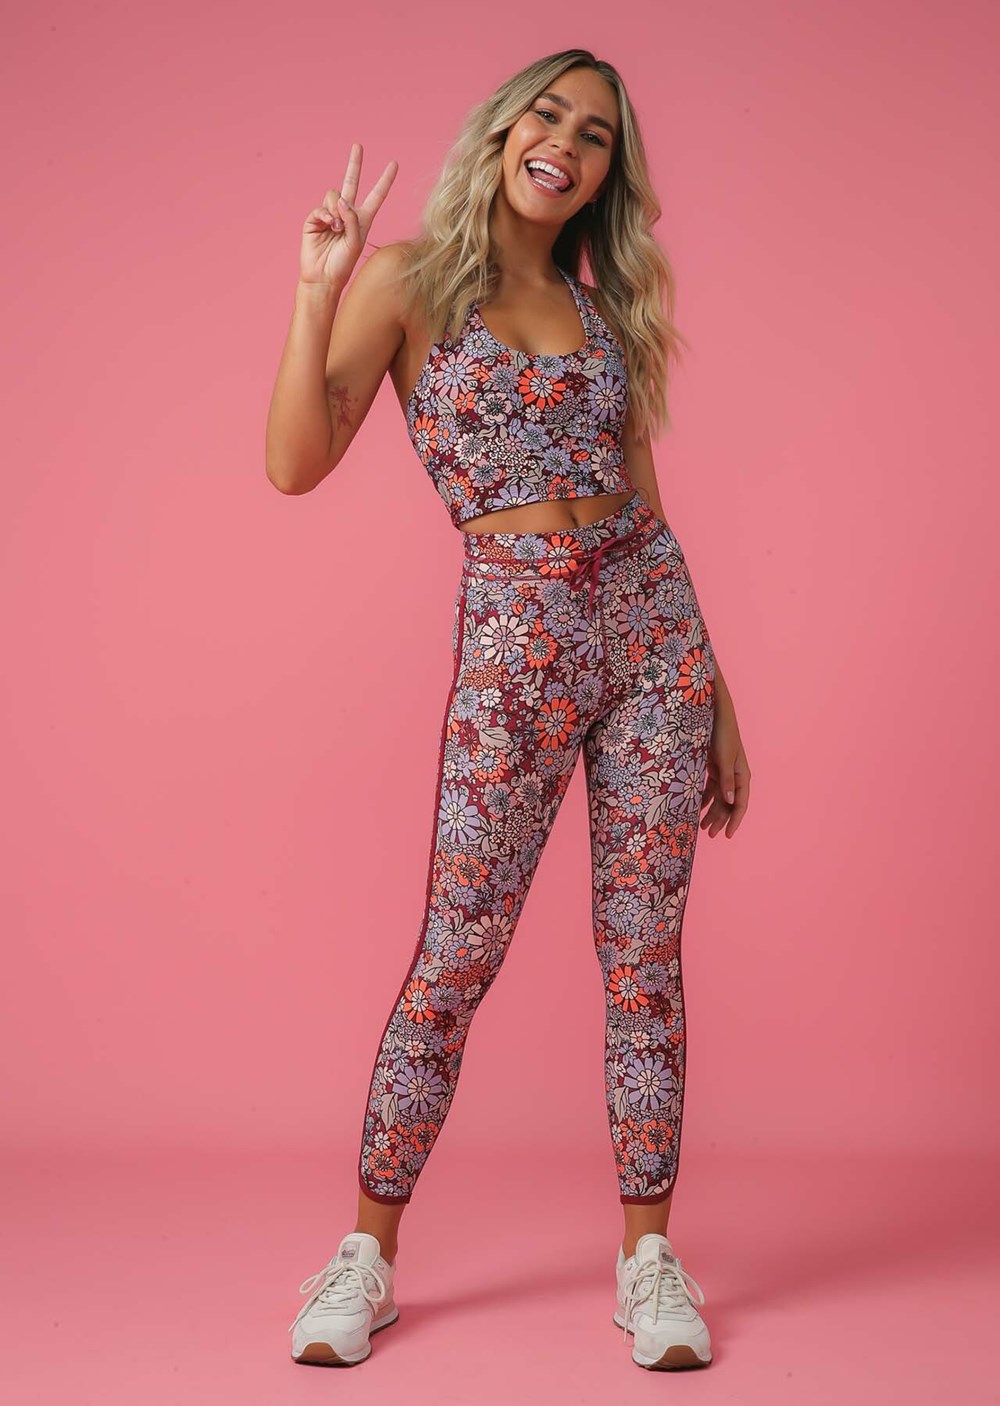 Lorna Jane Leggings Outlet South Africa - Womens Flower Child